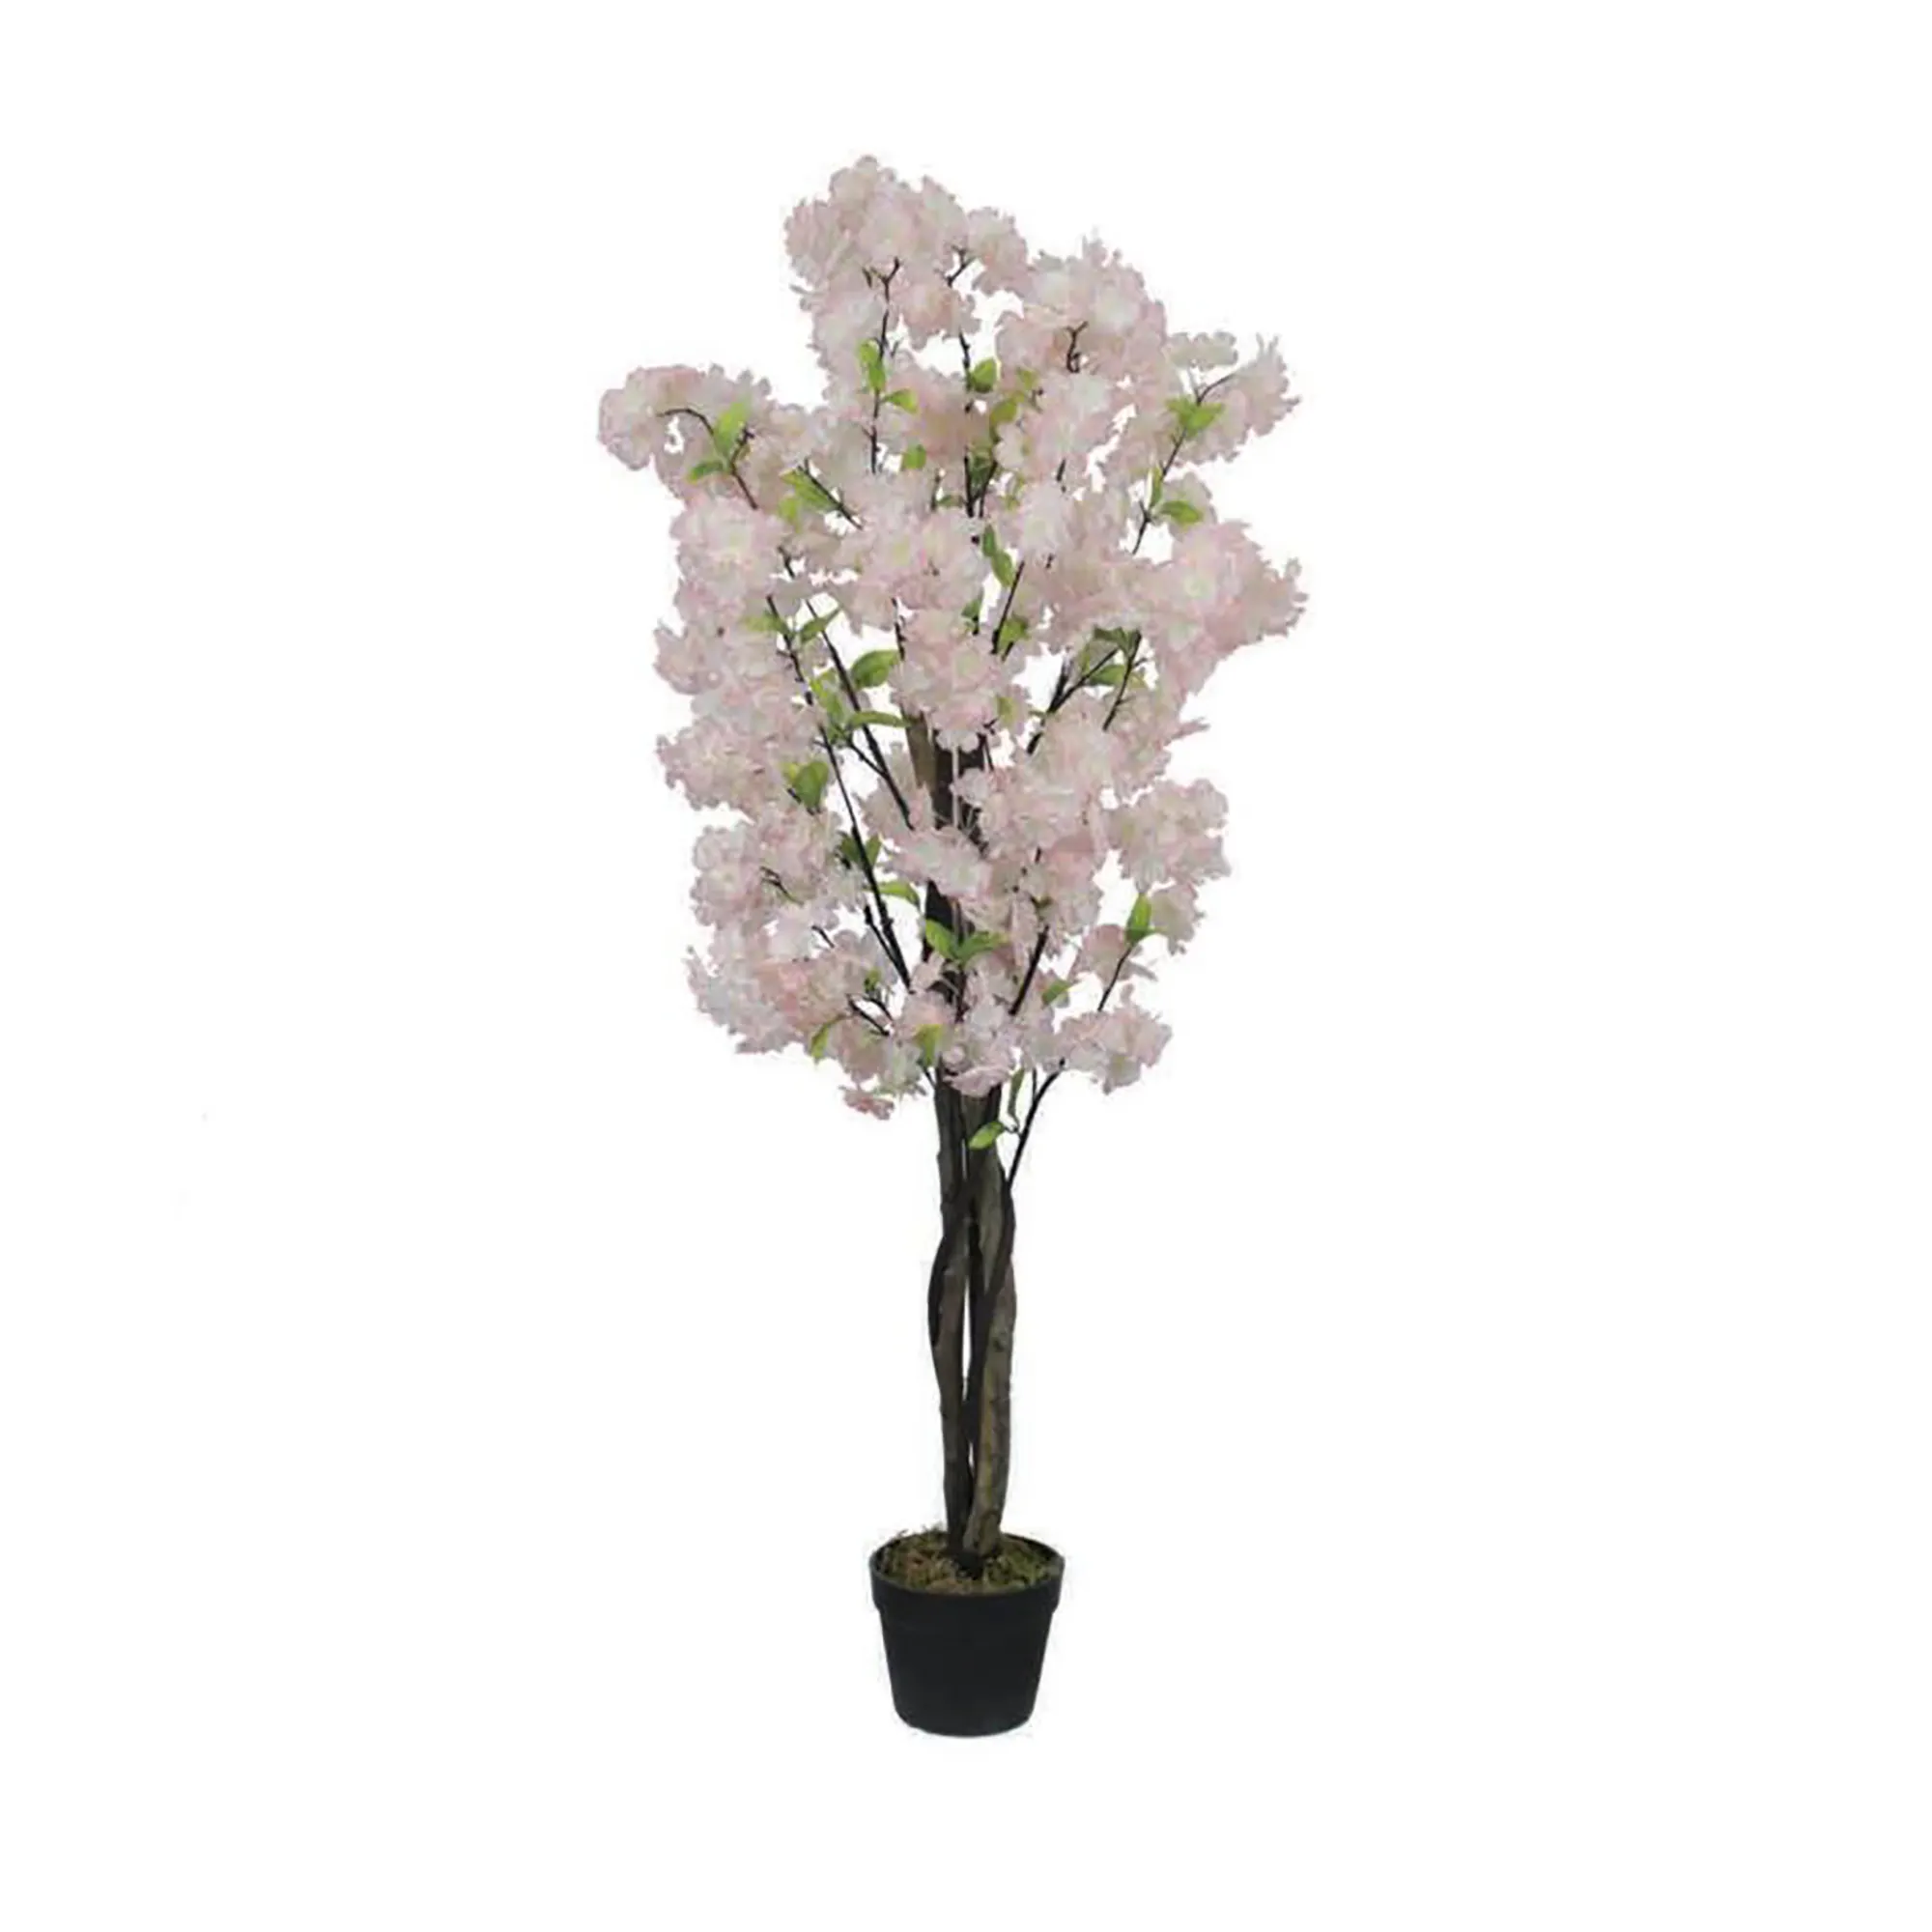 Linwoo Wholesale Artificial Peach Blossom Flower Tree High Quality Indoor Artificial Cherry Blossom Tree For Home Decoration